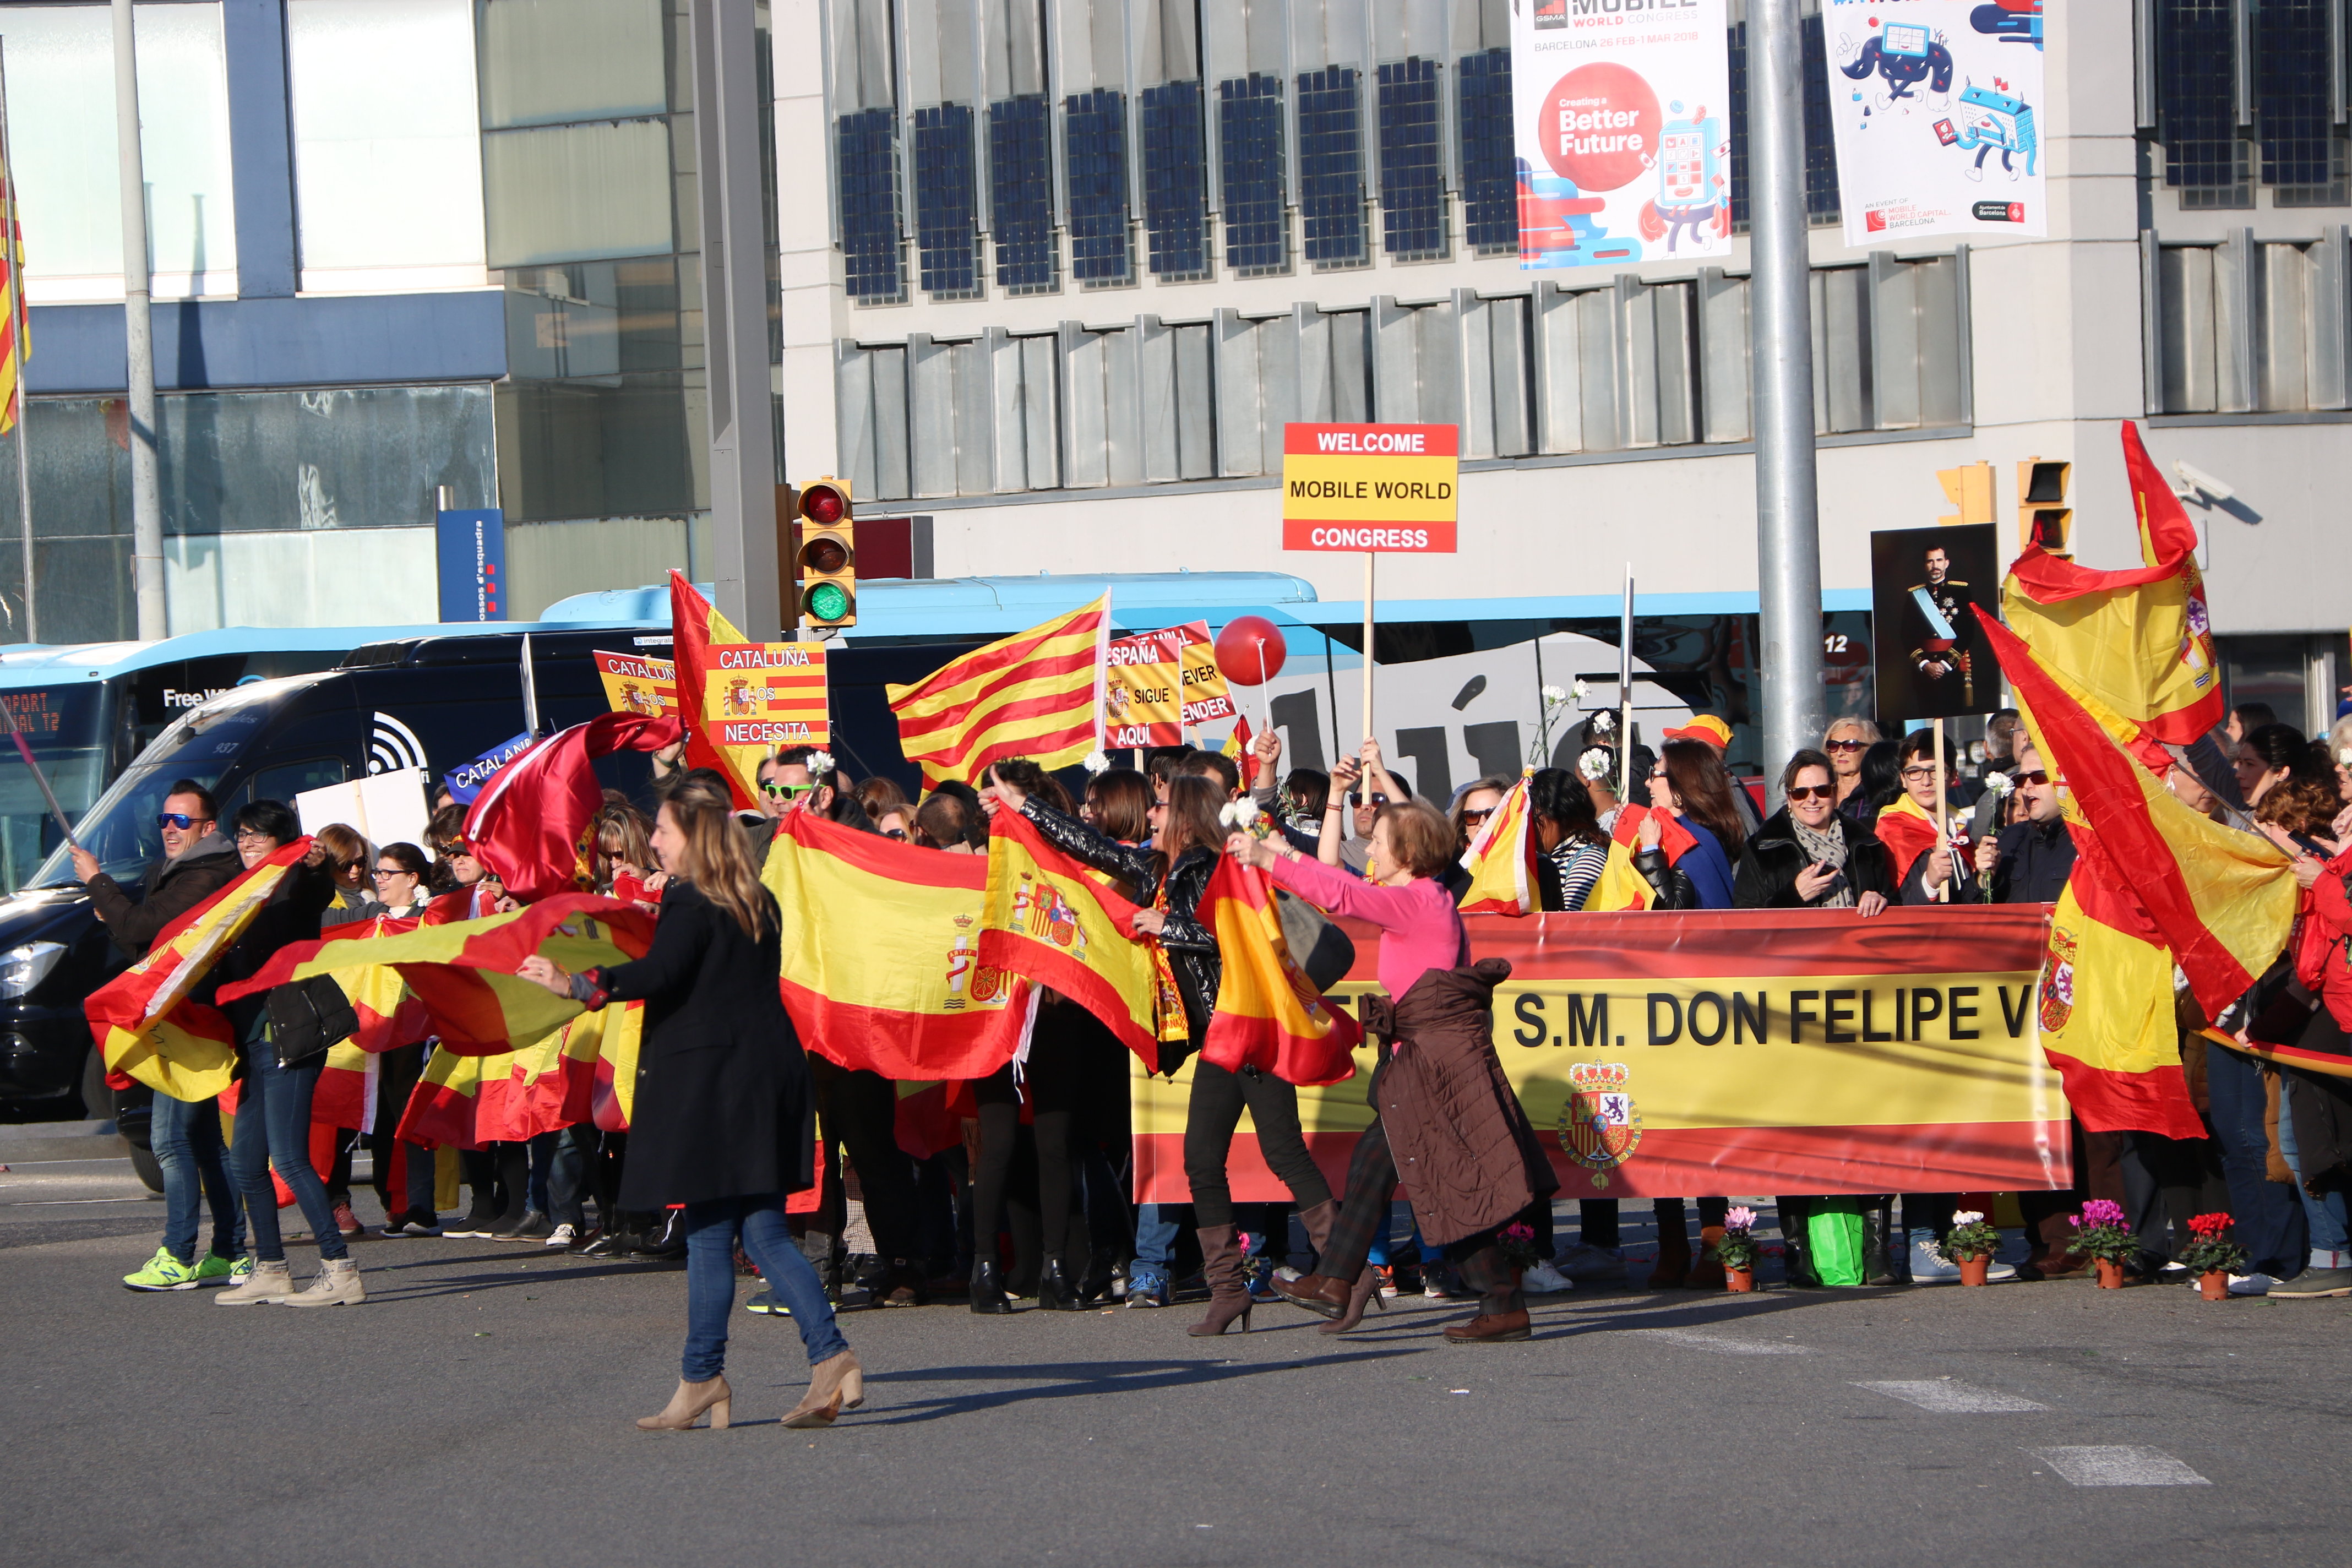 Unionist supporters welcoming the Spanish king (by ACN)